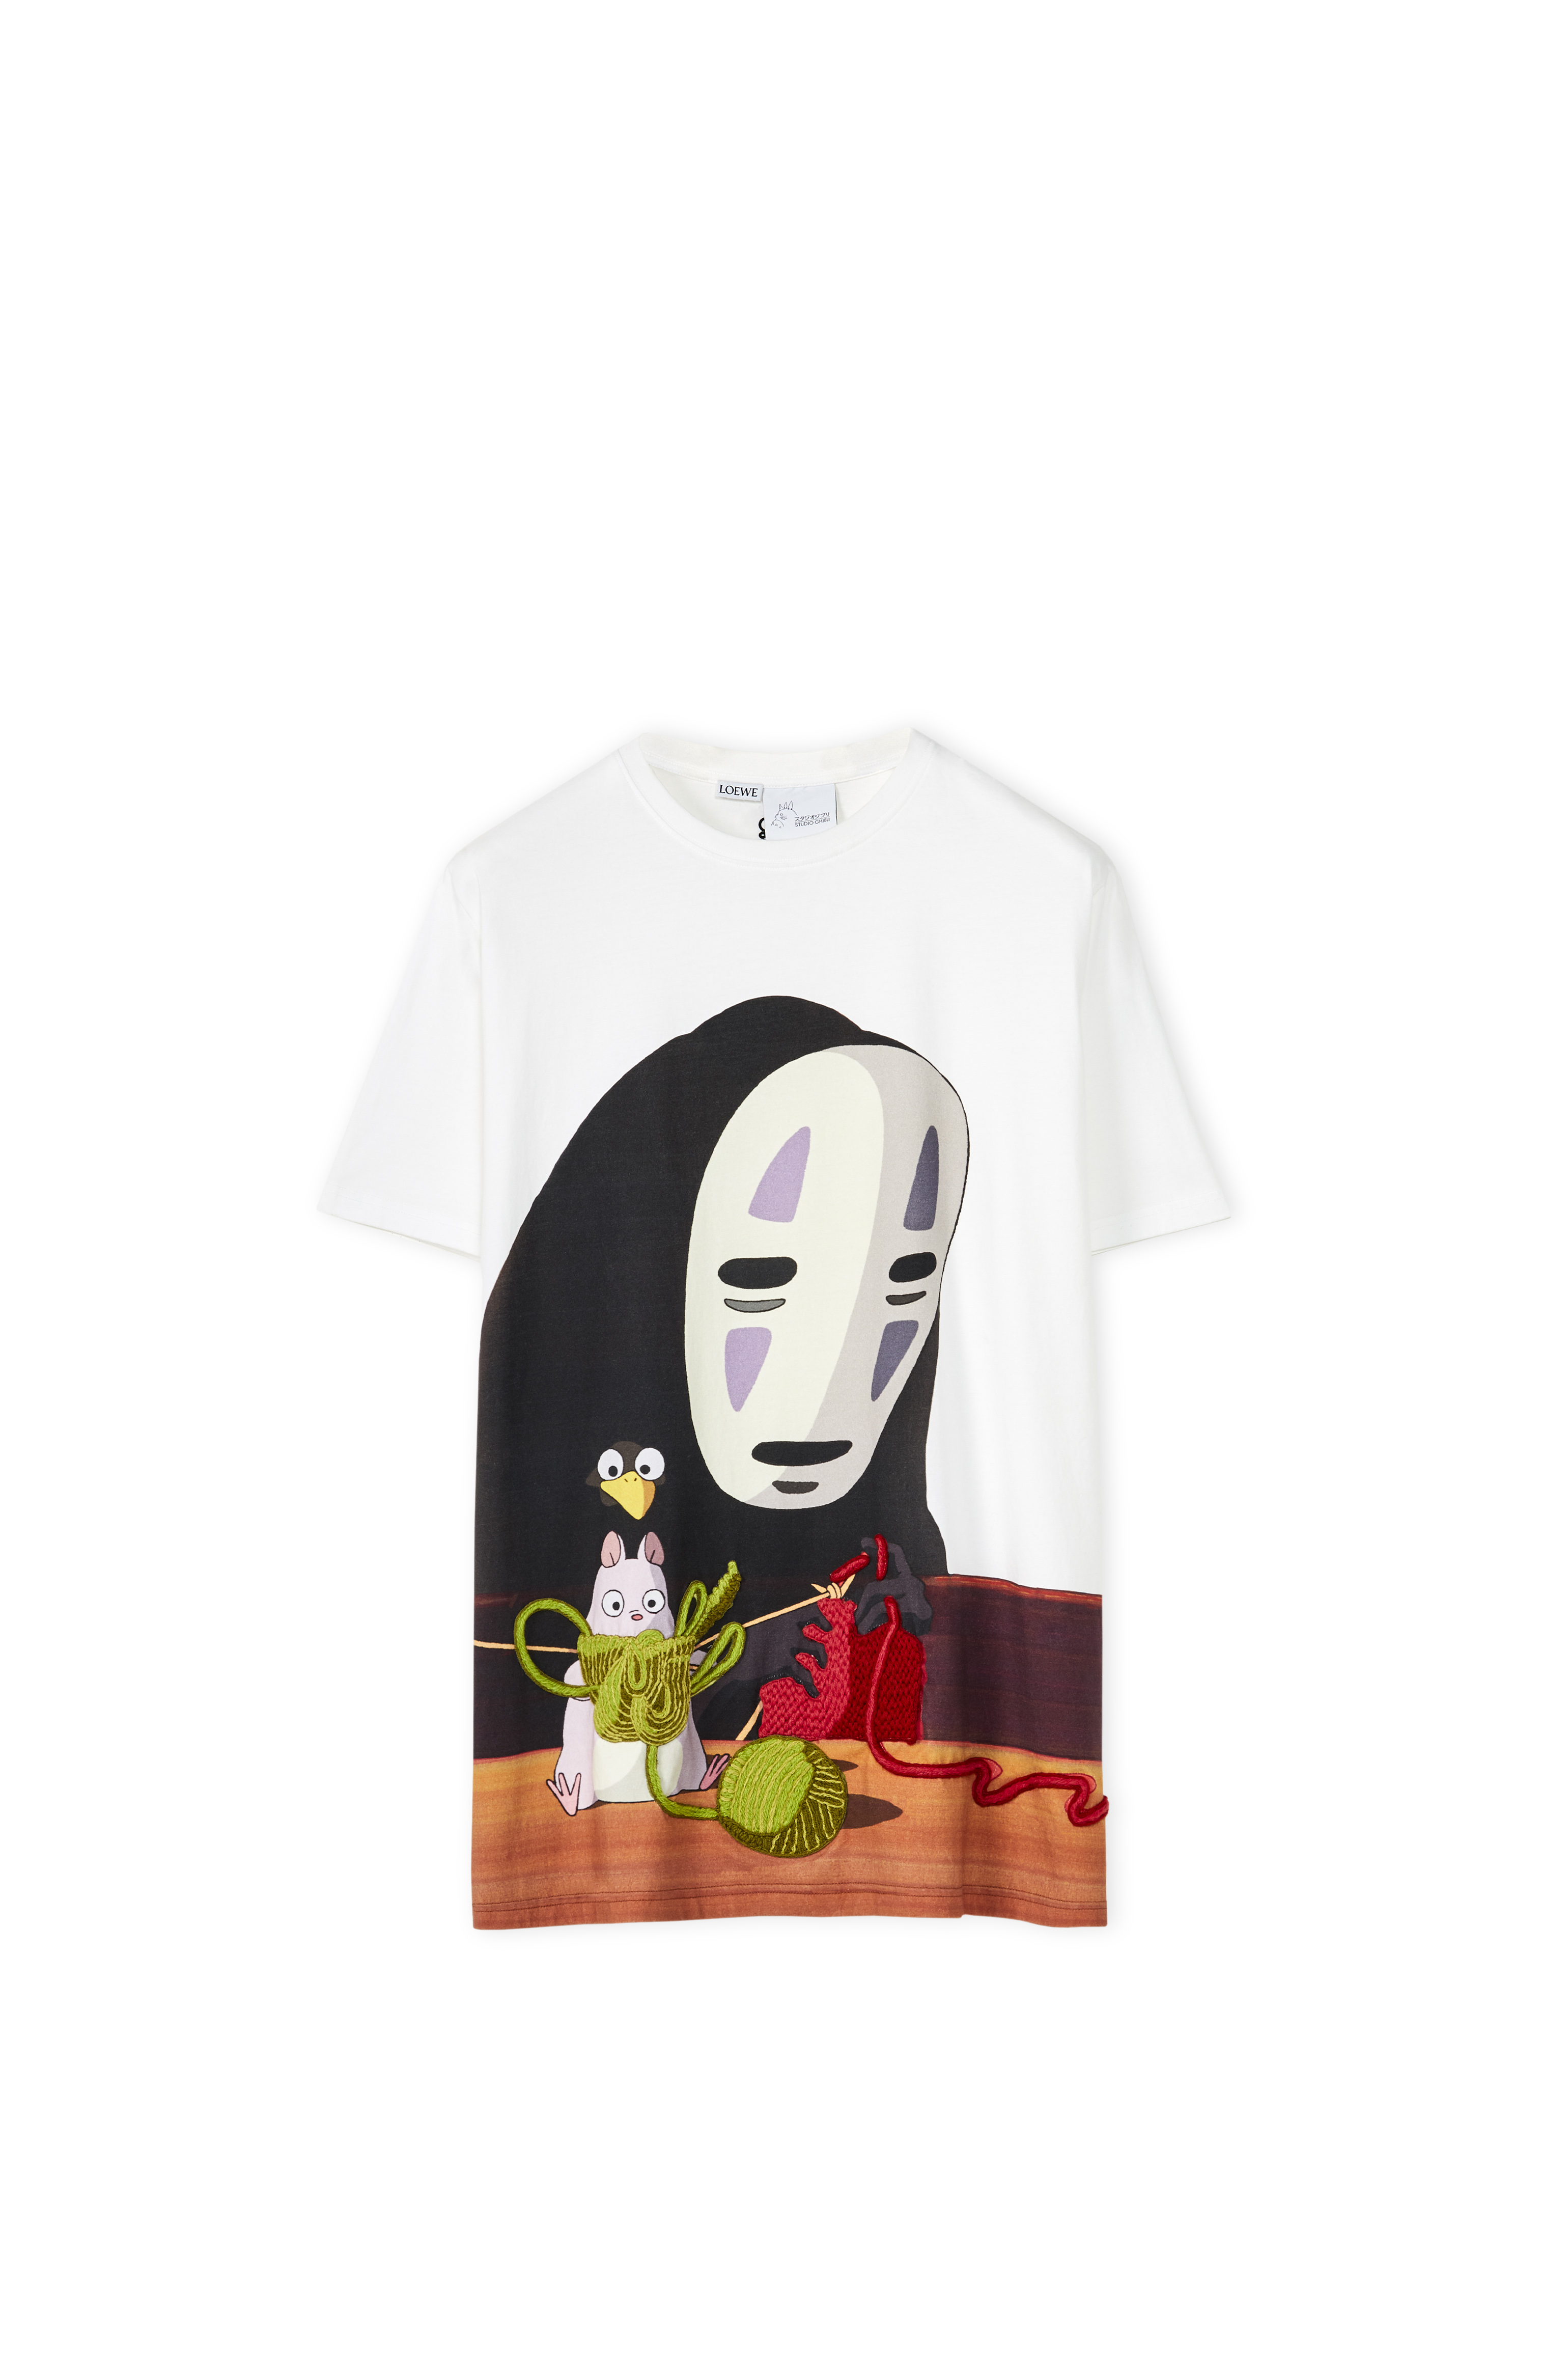 Loewe x Spirited Away collection with apparel, bags & more to 